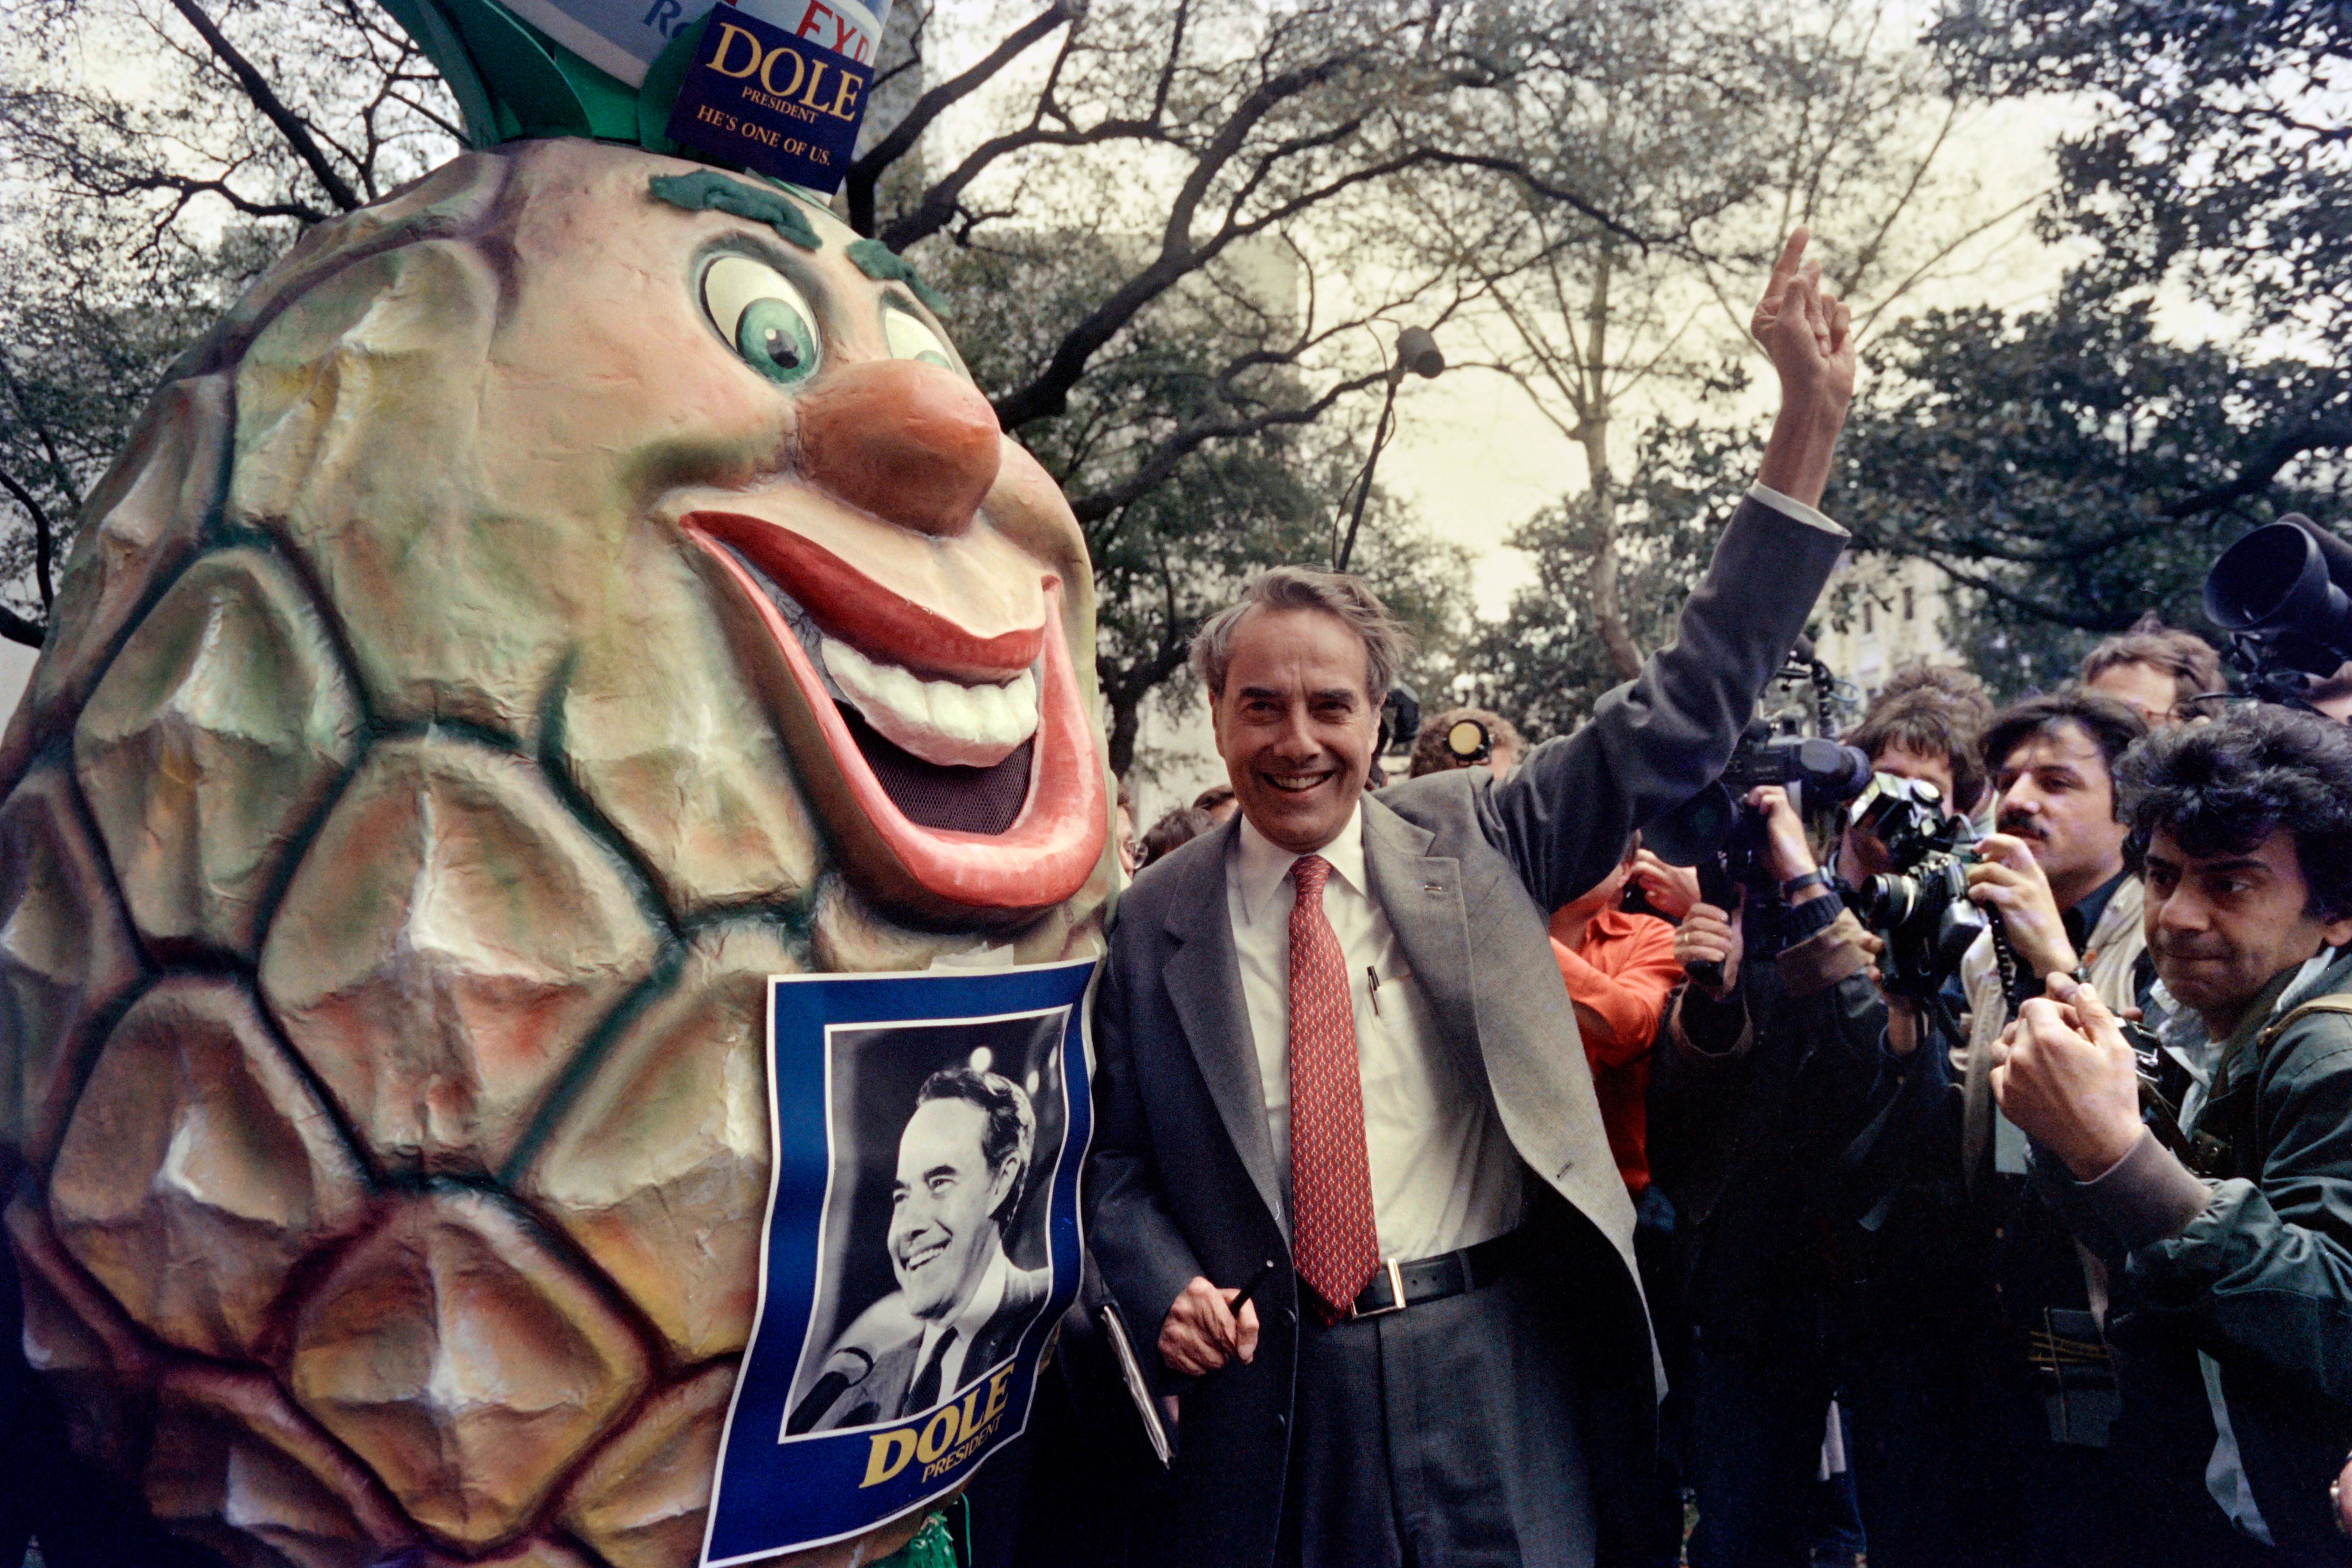 Republican presidential hopeful Senator Robert Dole, of Kansas, campaigns along side a giant pineapple on March 3, 1988 in Louisiana. (Photo by Mike SPRAGUE / AFP) (Photo credit should read MIKE SPRAGUE/AFP/Getty Images)